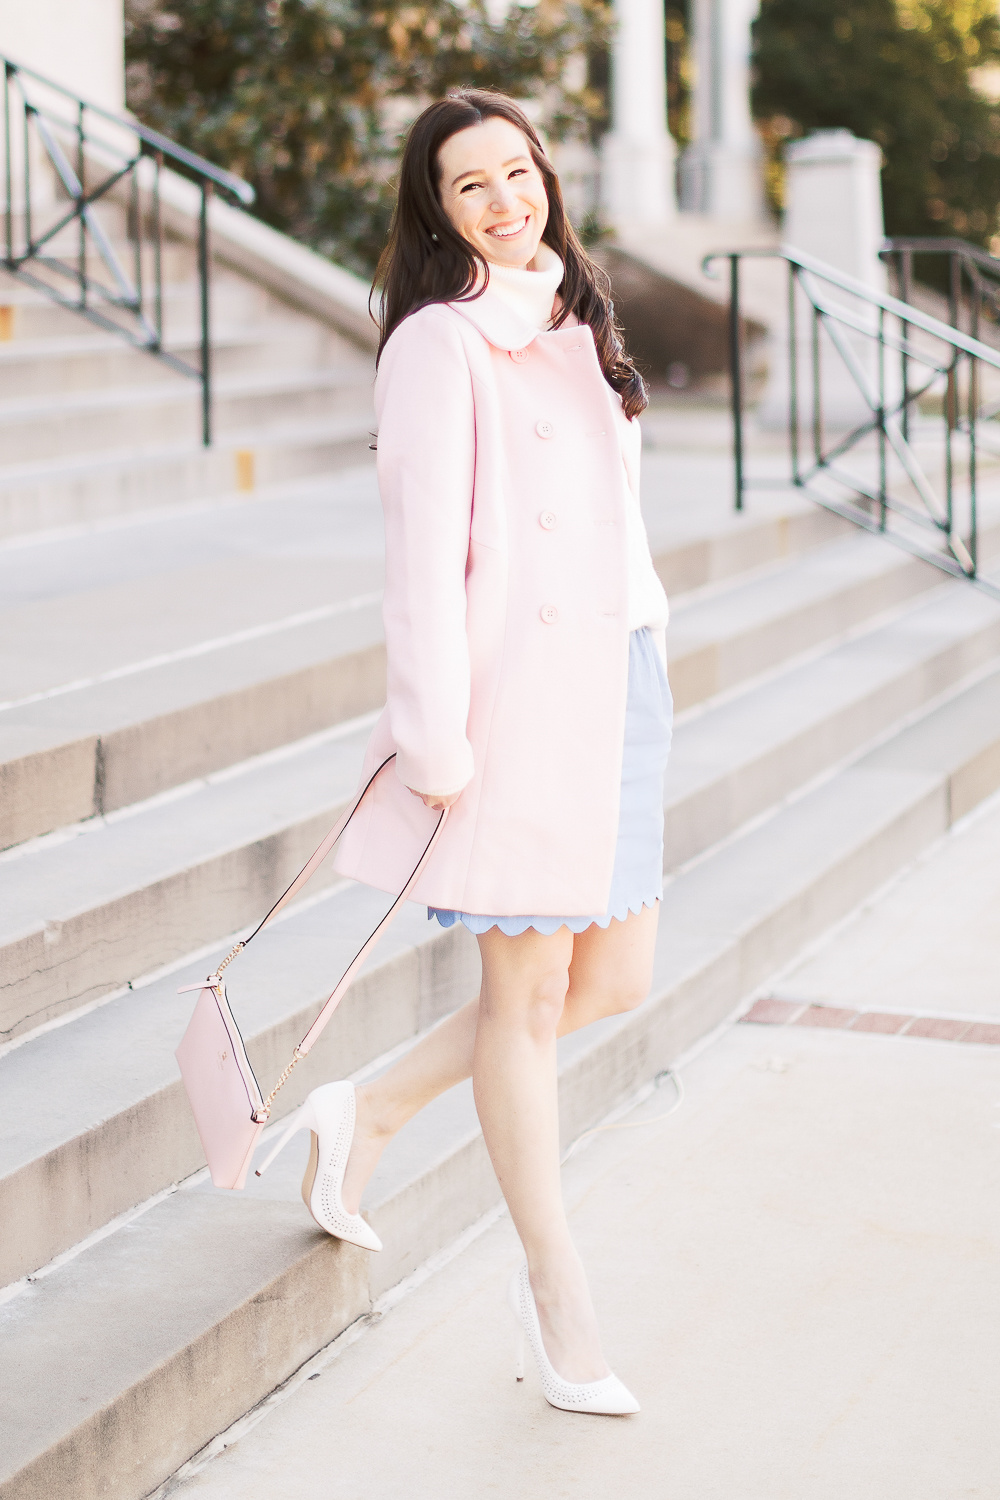 Preppy Spring Outfits: My Top J.Crew Factory Spring Style Picks by Stephanie Ziajka from the popular affordable fashion blog Diary of a Debutante, J.Crew Factory Scalloped Sidewalk Skirt, J.Crew Factory Scalloped Cami Tops, cute spring outfits for women, cute spring outfits